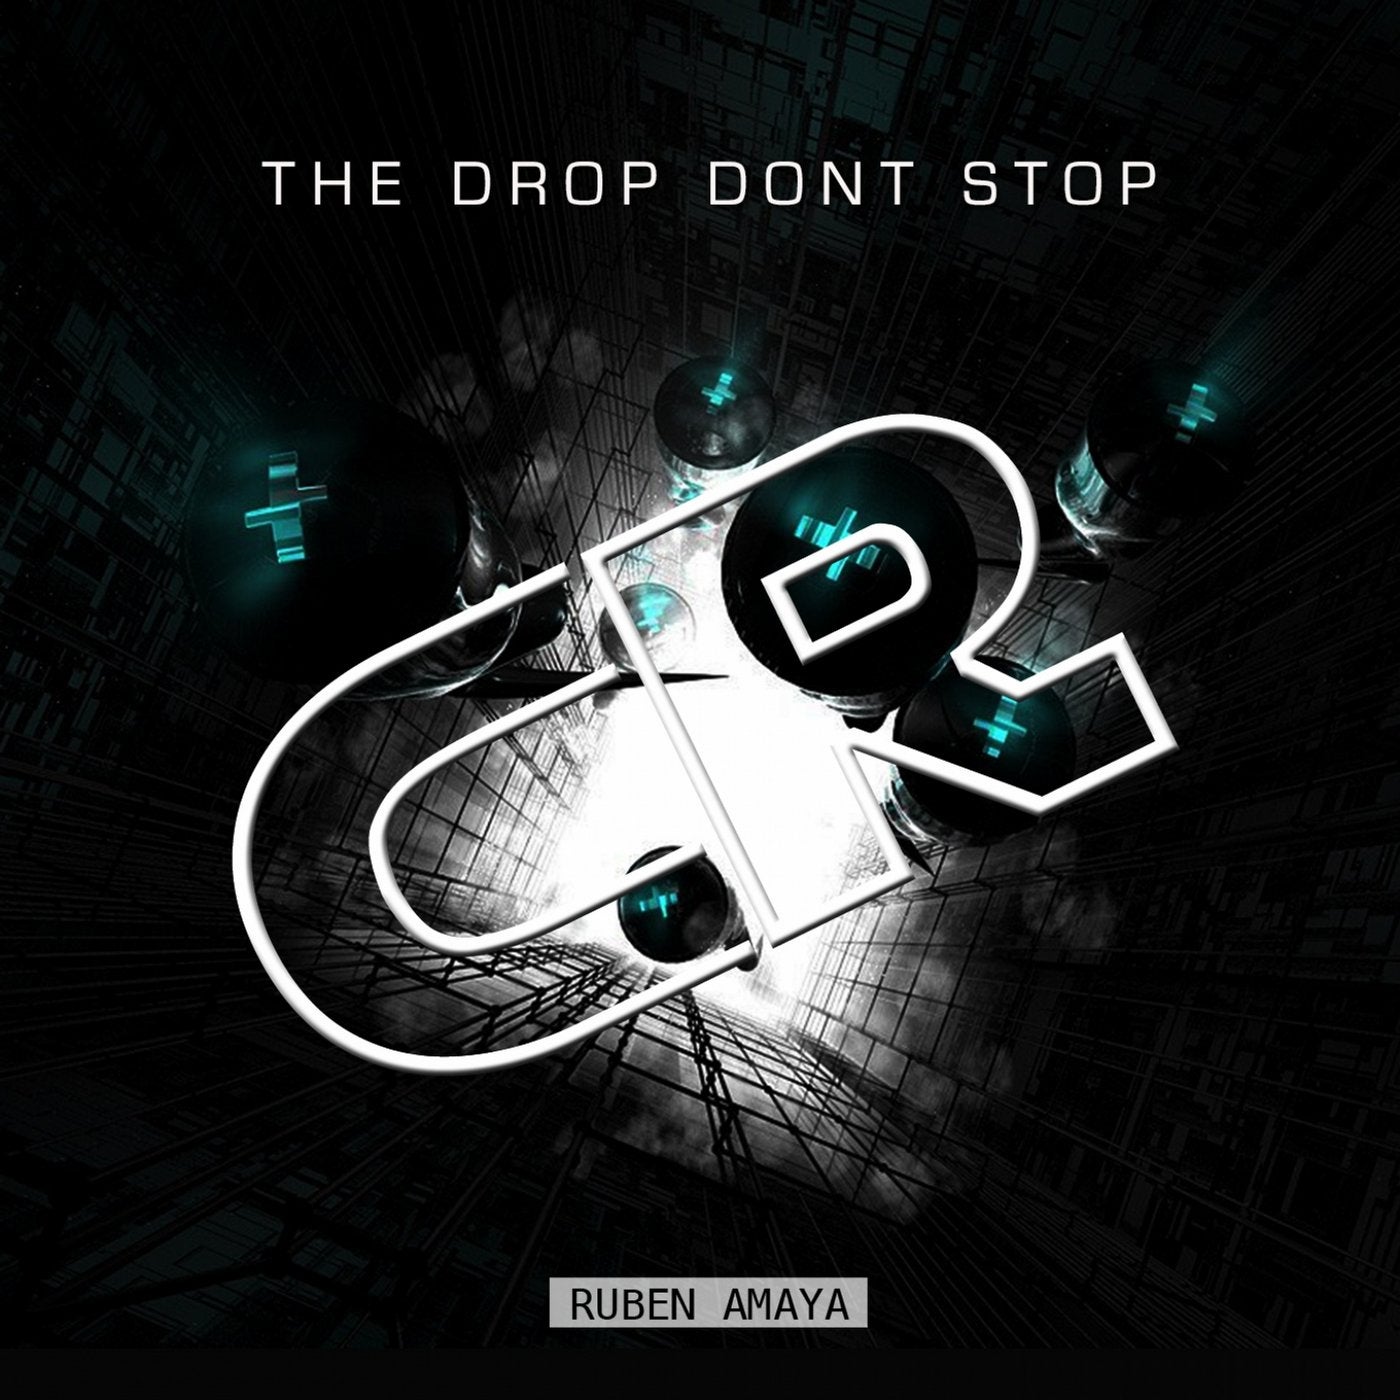 The Drop Don't Stop